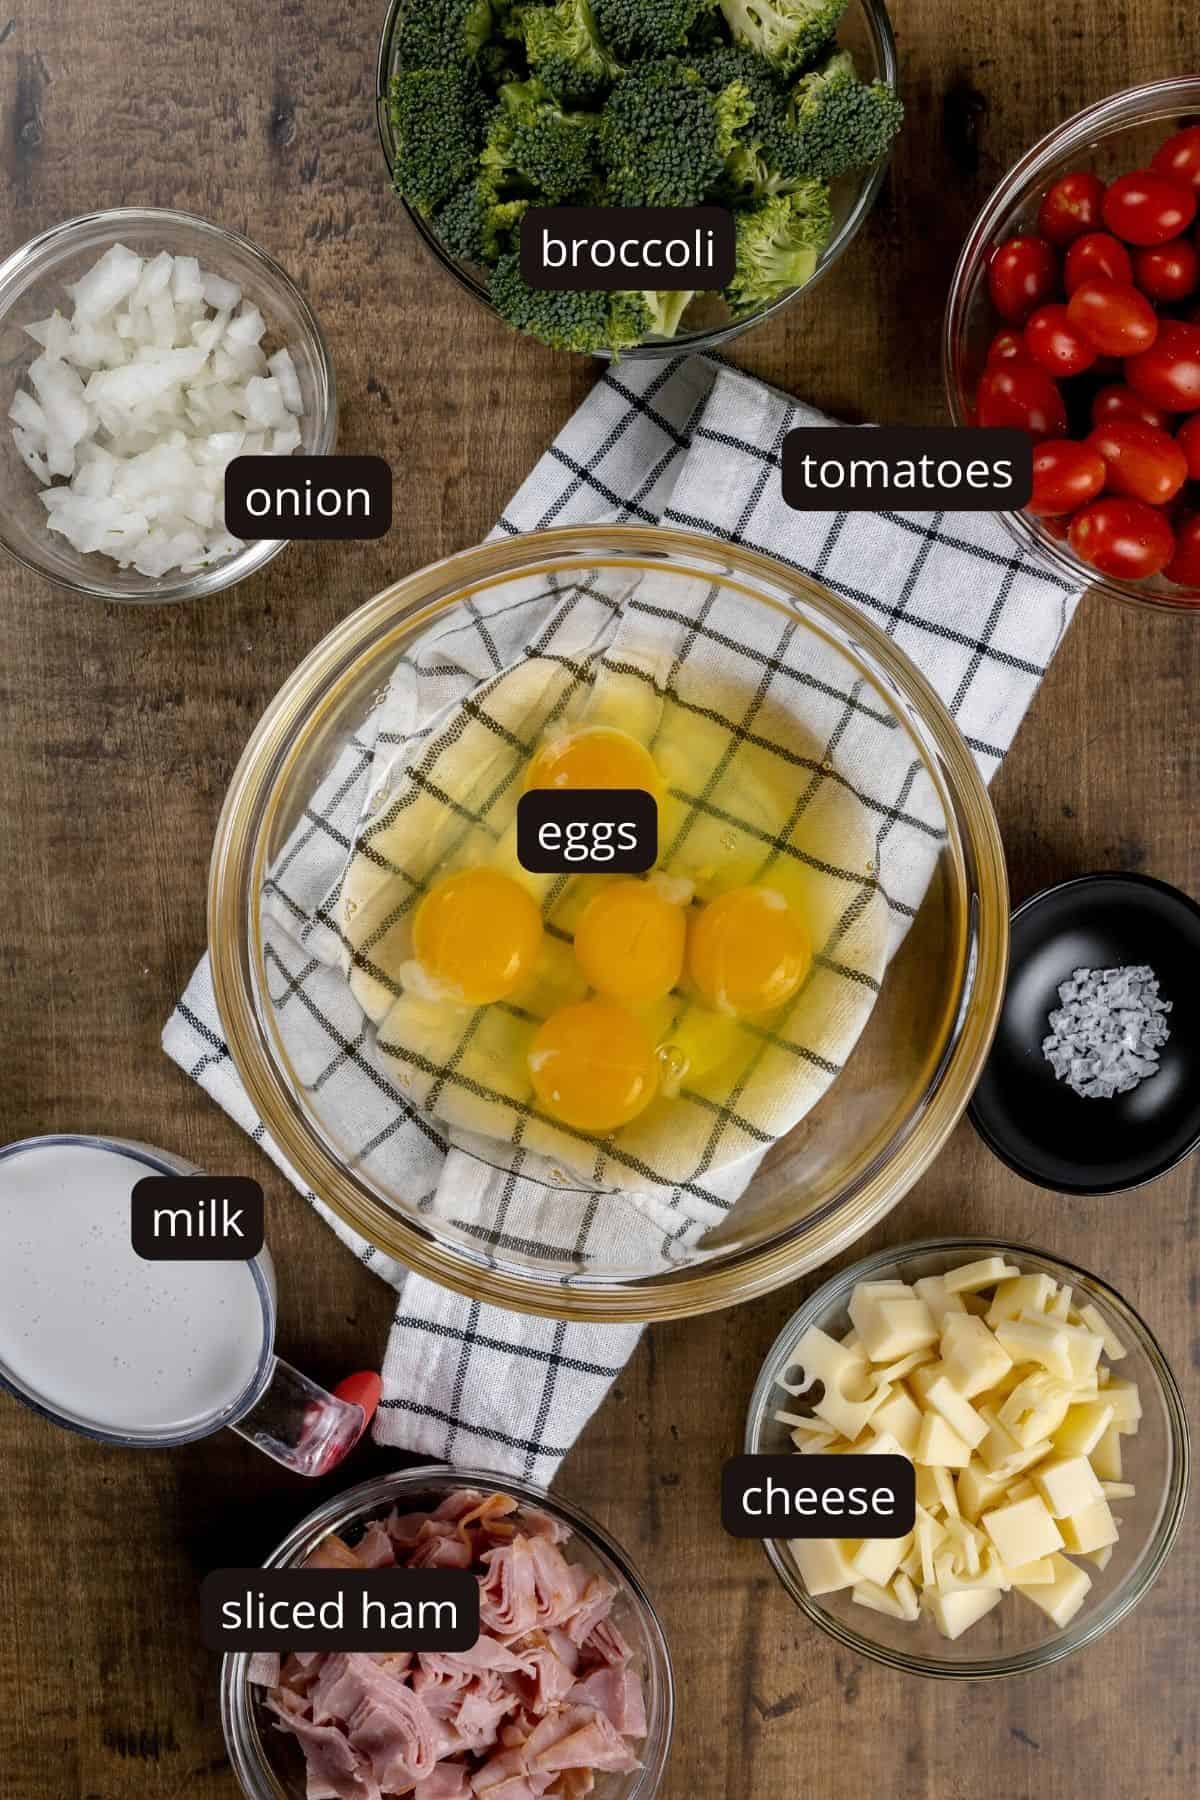 The different fillings for the quiche are in various glass bowls on a wood tabletop surrounding a large bowl willed with cracked eggs. Black and white labels have been added to name each ingredient.